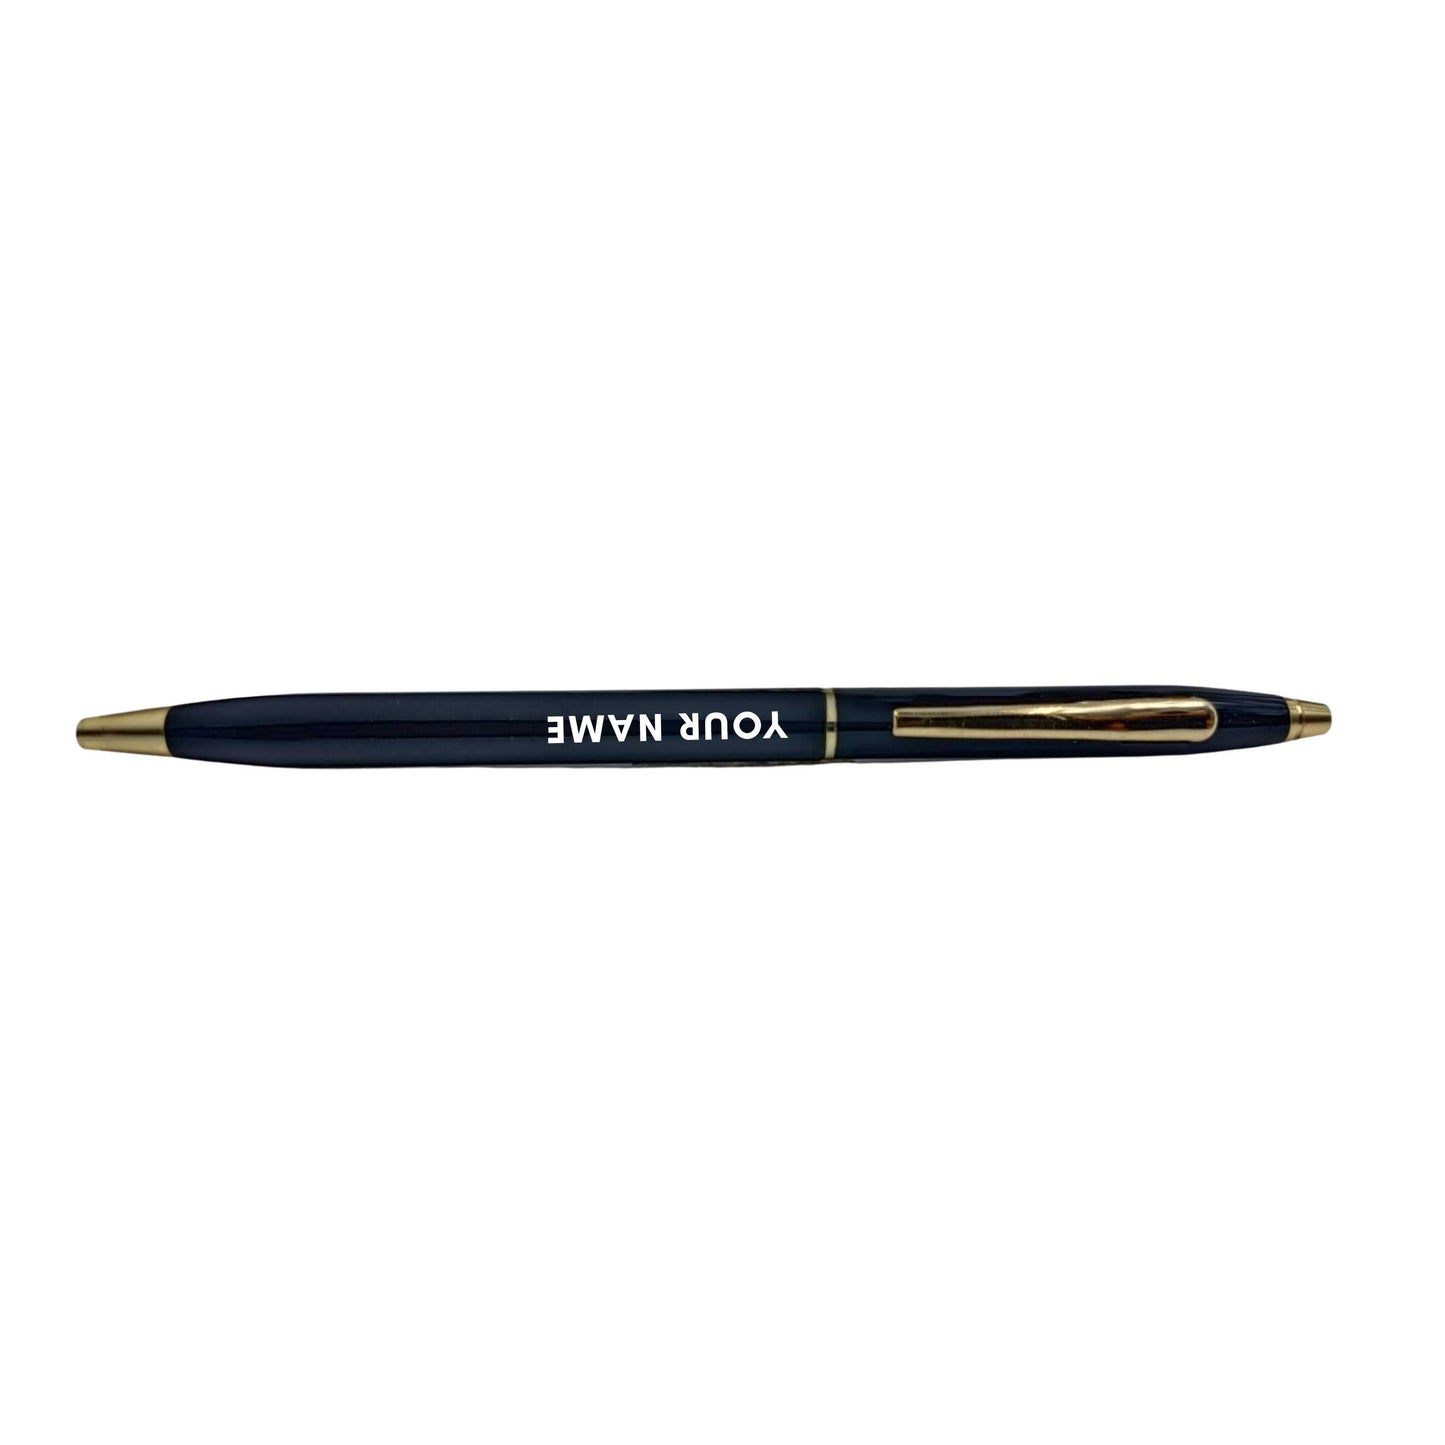 Personalised Pen With Name Engraved Gift Set for for Boss Office Colleagues - Name